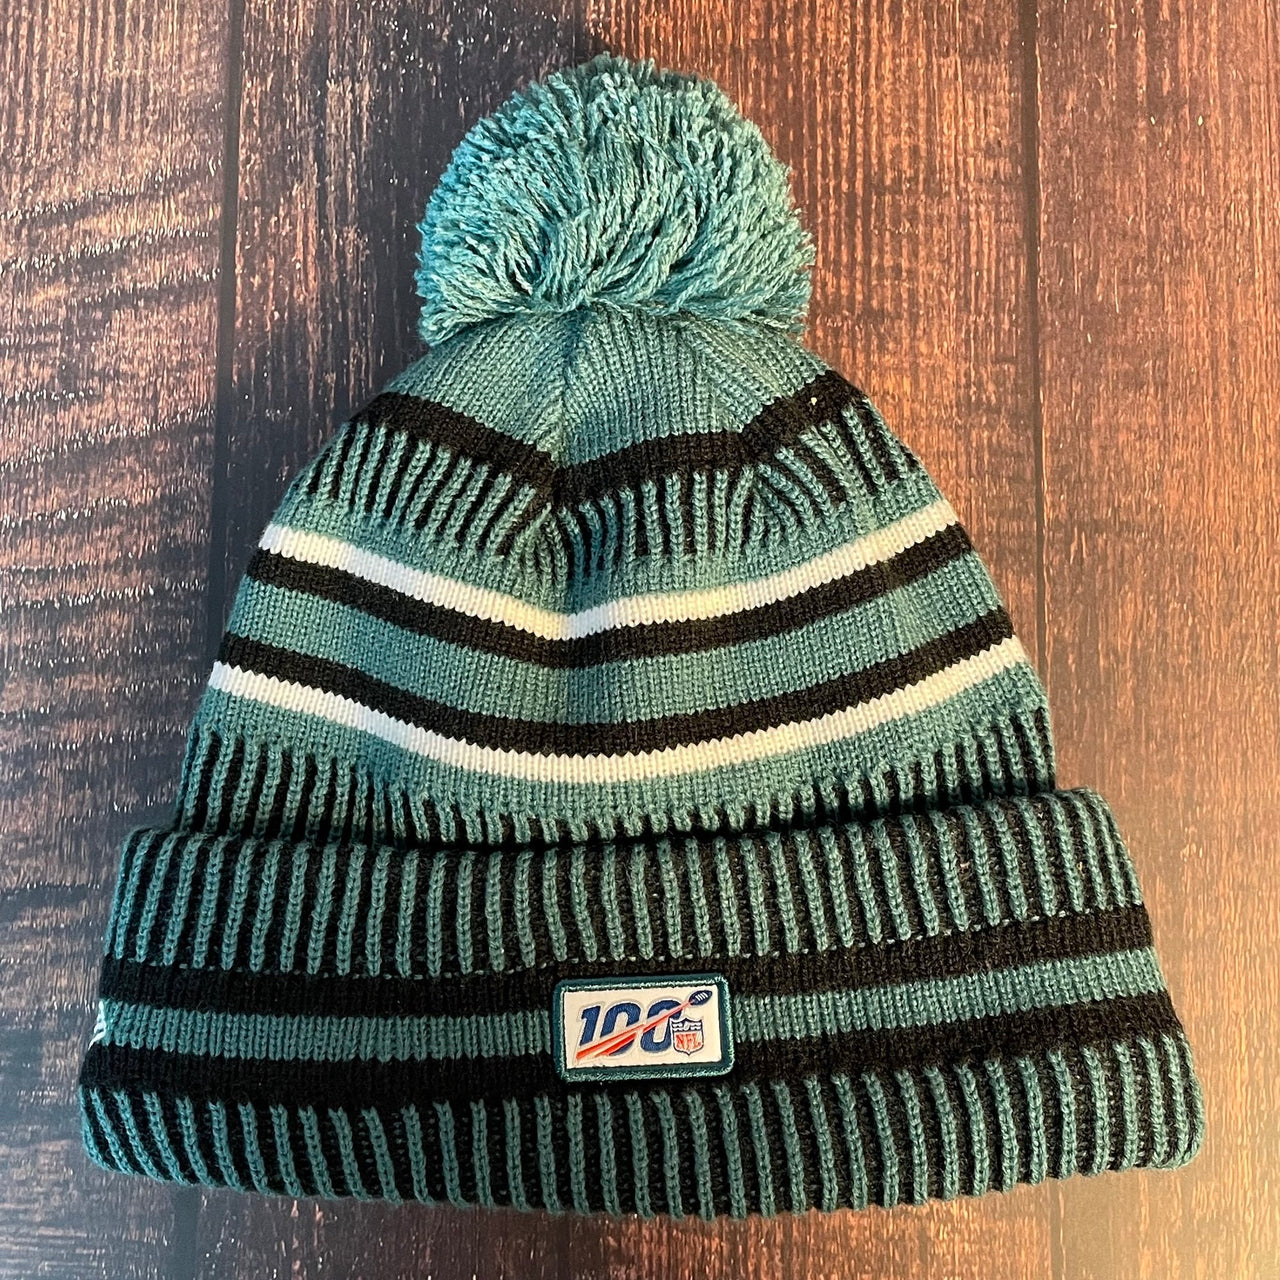 The back of the Philadelphia Eagles On Field Eagles Colorway Striped Pom Pom Beanie features the NFL logo